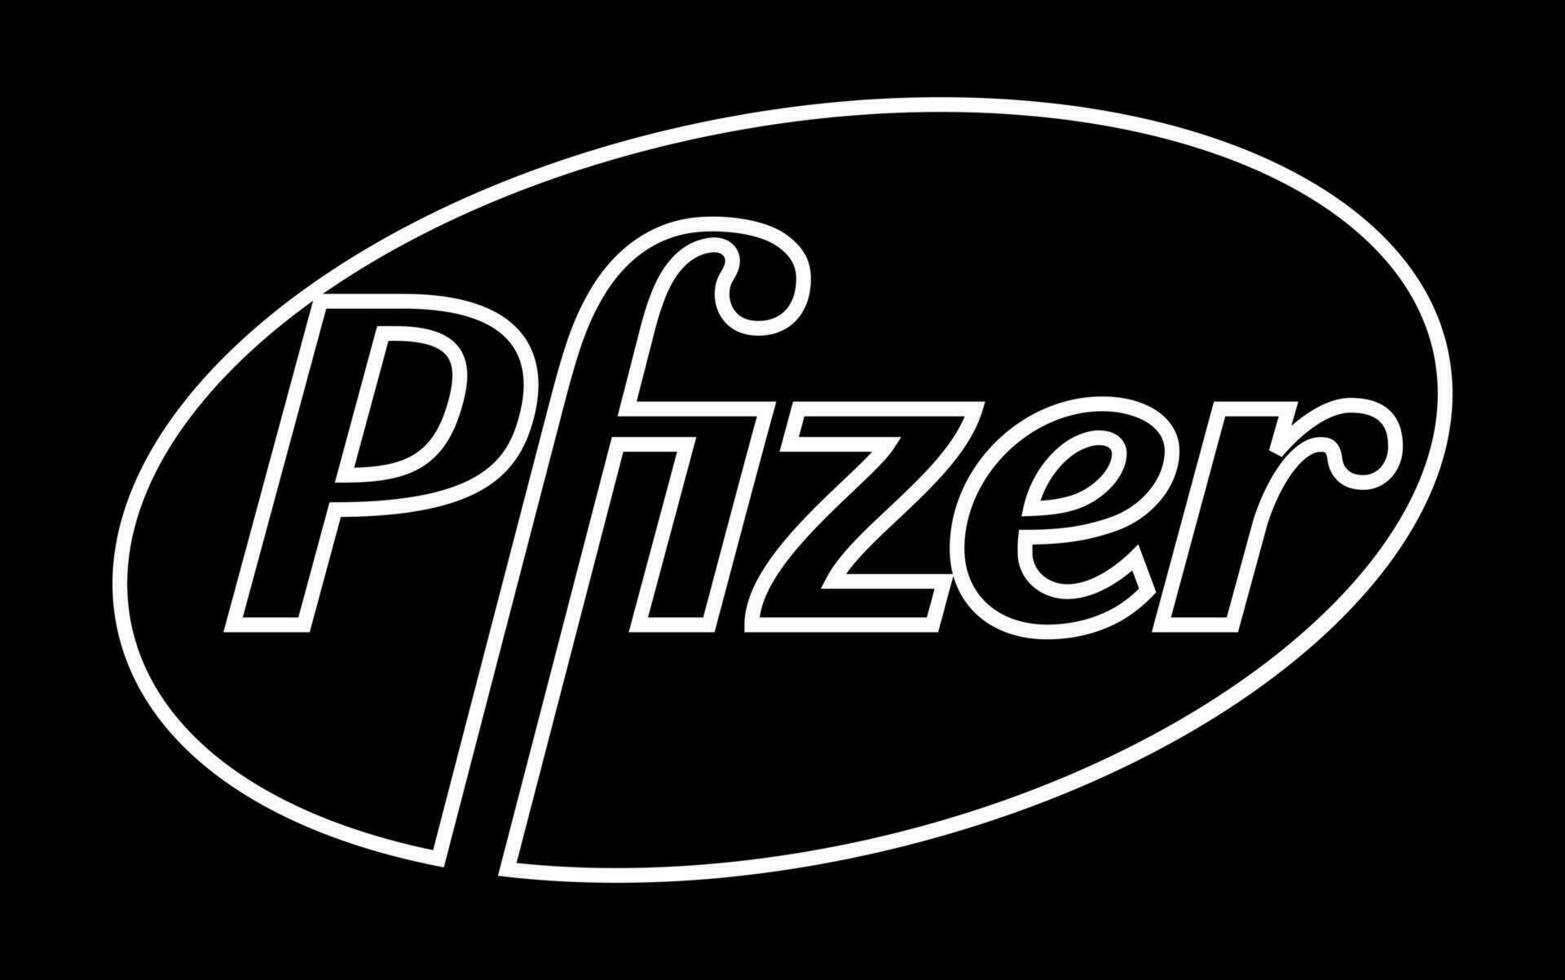 Pfizer Vector Logo - Black Color Silhouette - American pharmaceutical corporation that research and development vaccines and medical products. Pharmacy laboratory.